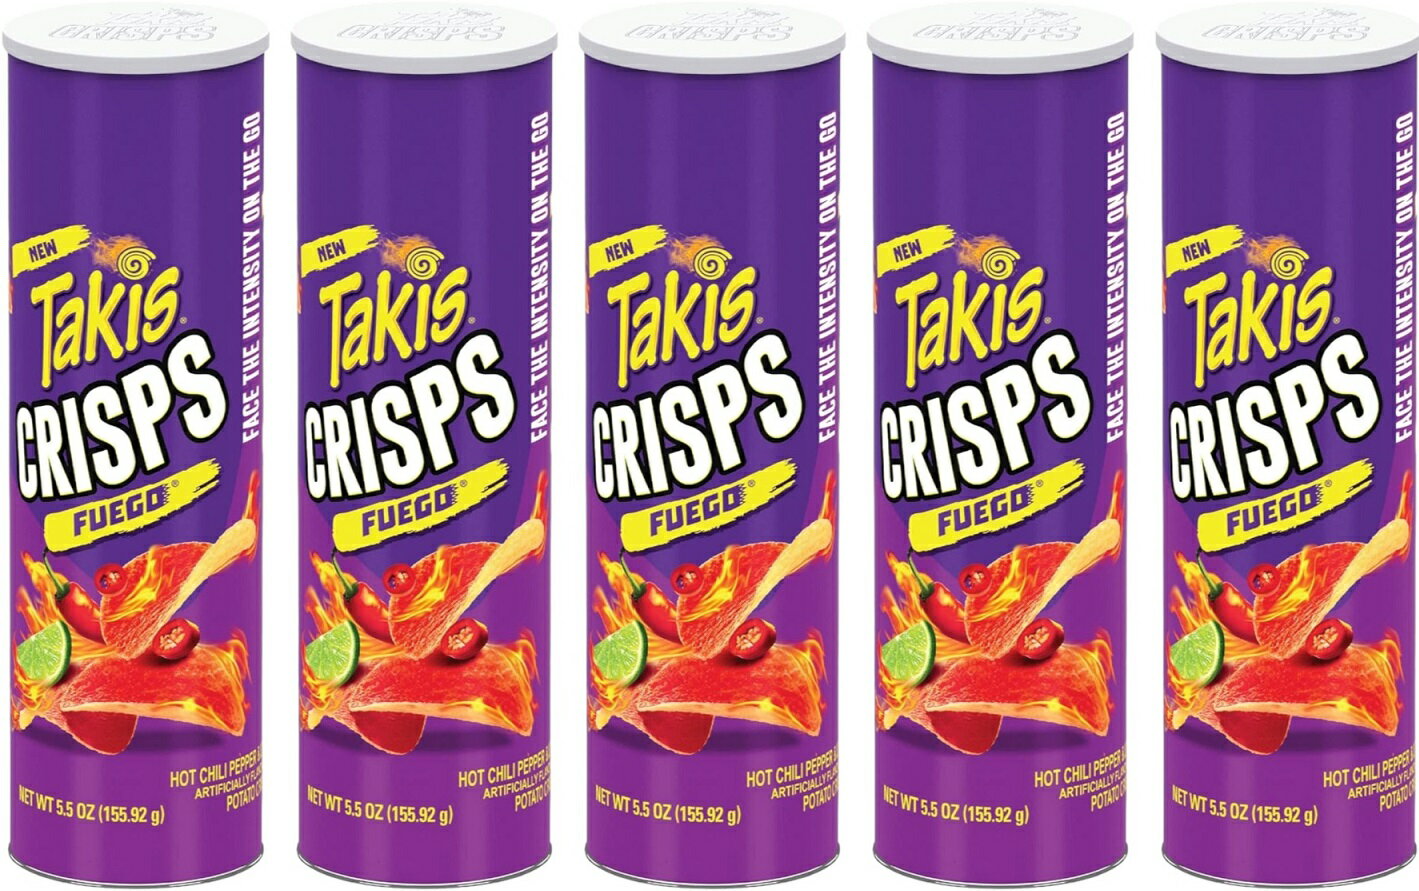 Takis Fuego CRISPS 5本セット （タキス フエゴ クリスプス ）